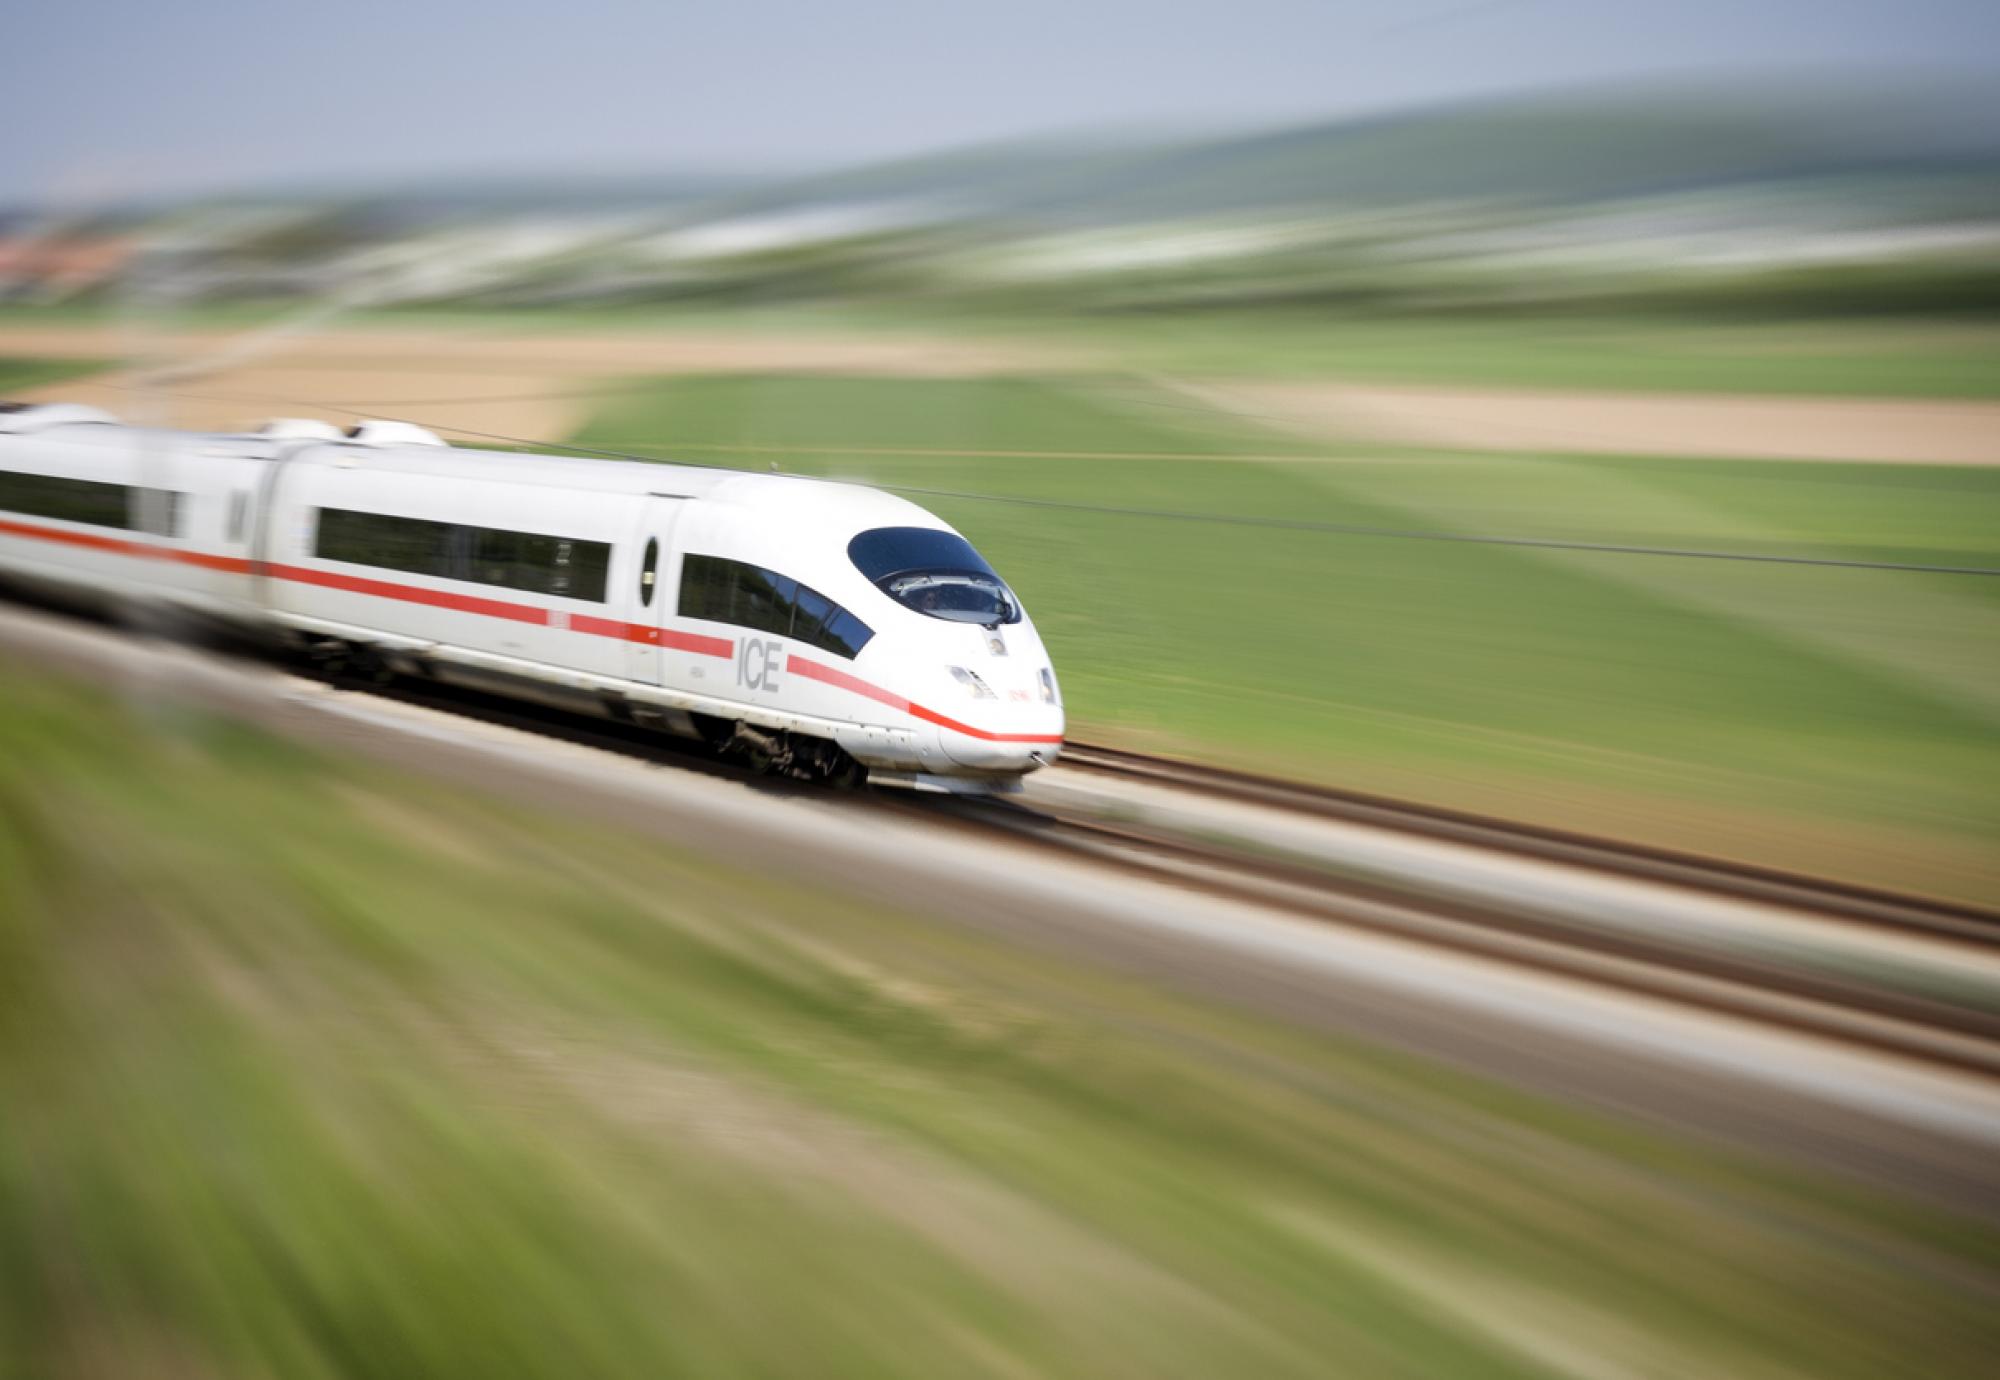 New study shows how High-Speed Rail could look in Europe in 2050